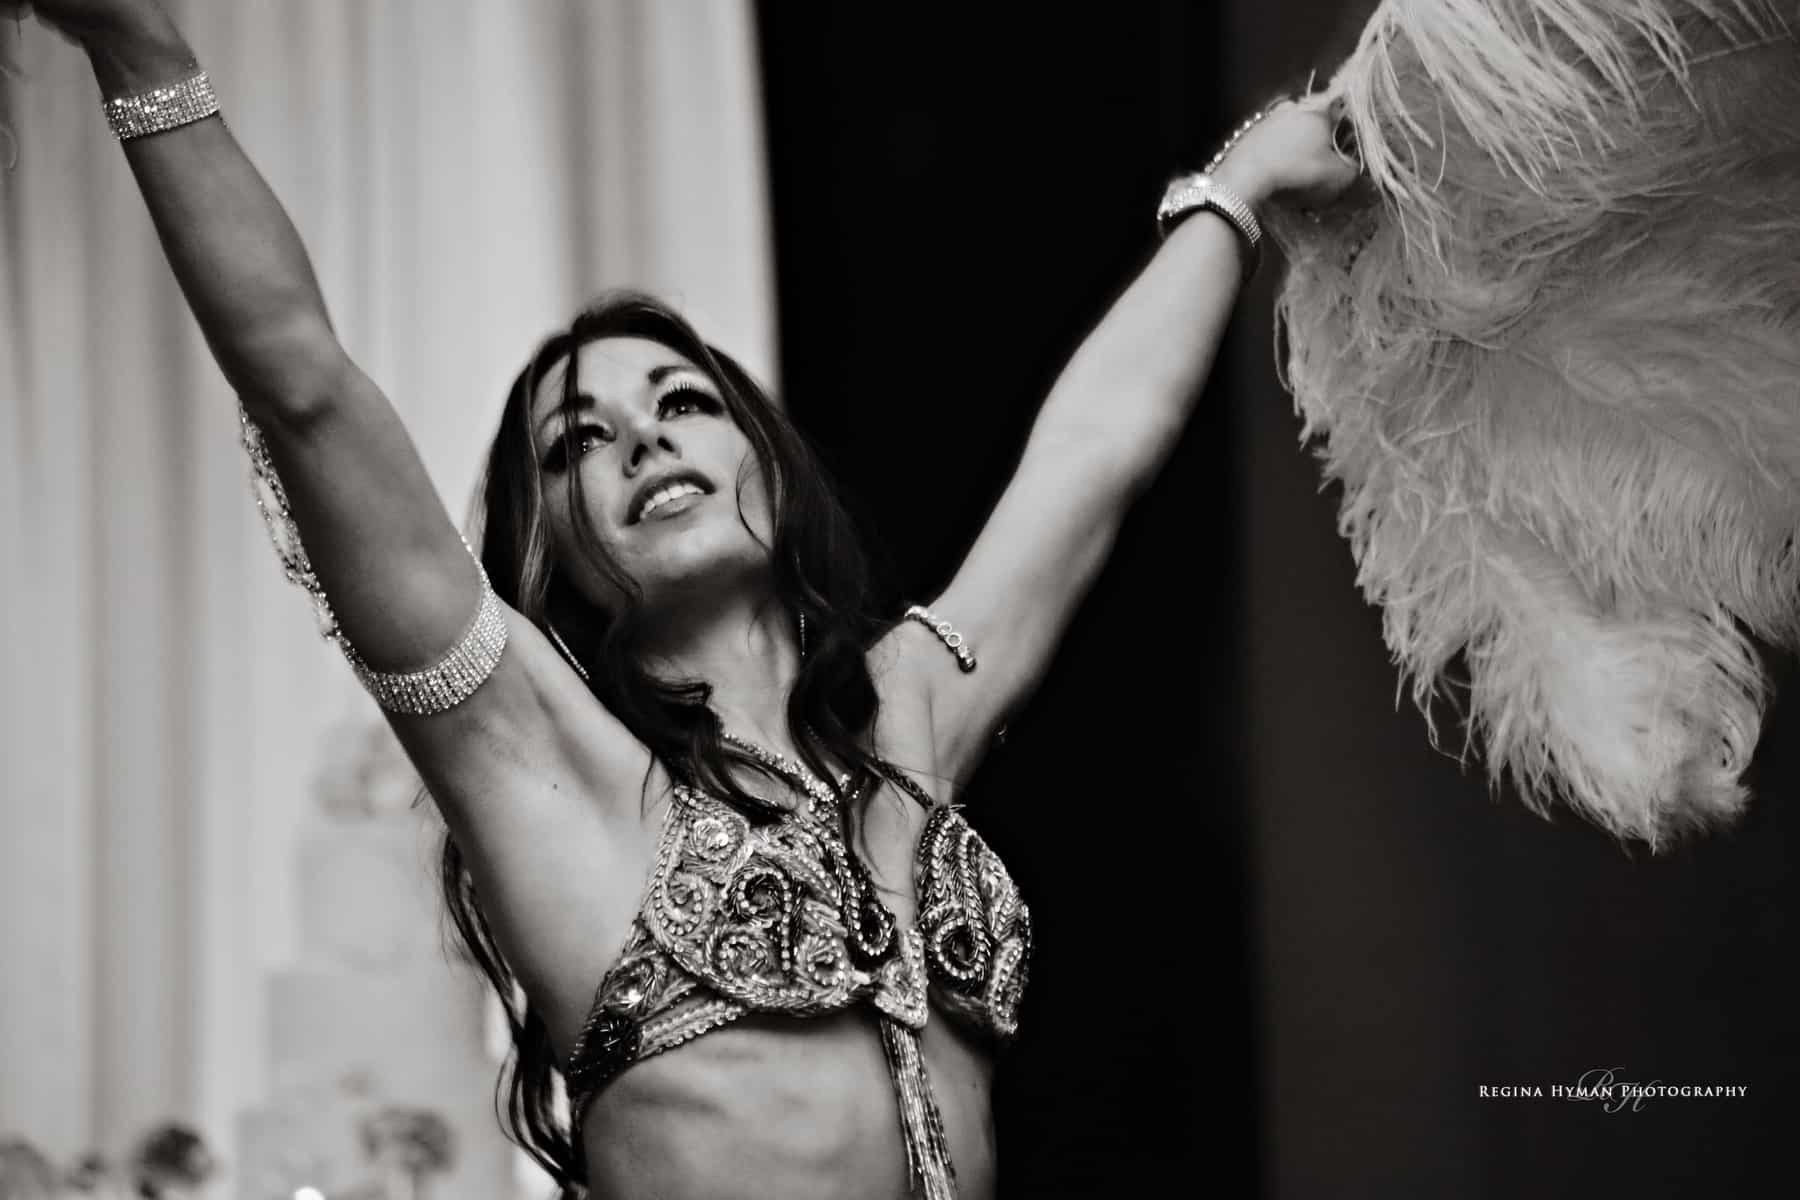 Belly Dancer Carrara Nour performs with feather fans at a wedding at the Ballroom at Church Street in Orlando